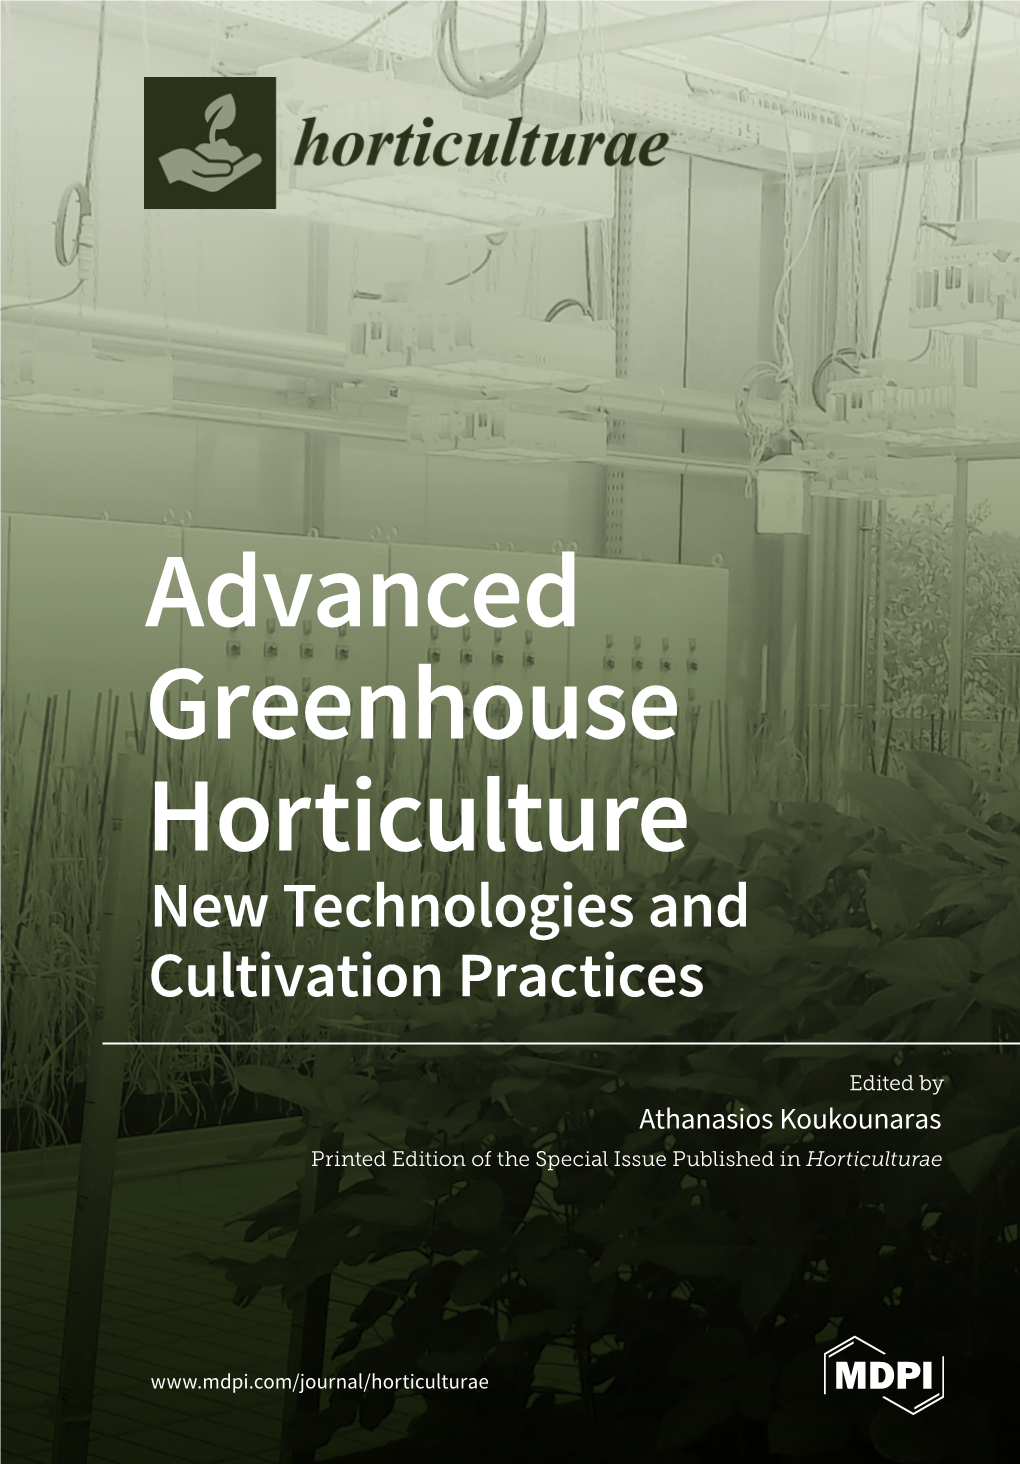 Advanced Greenhouse Horticulture New Technologies and Cultivation Practices